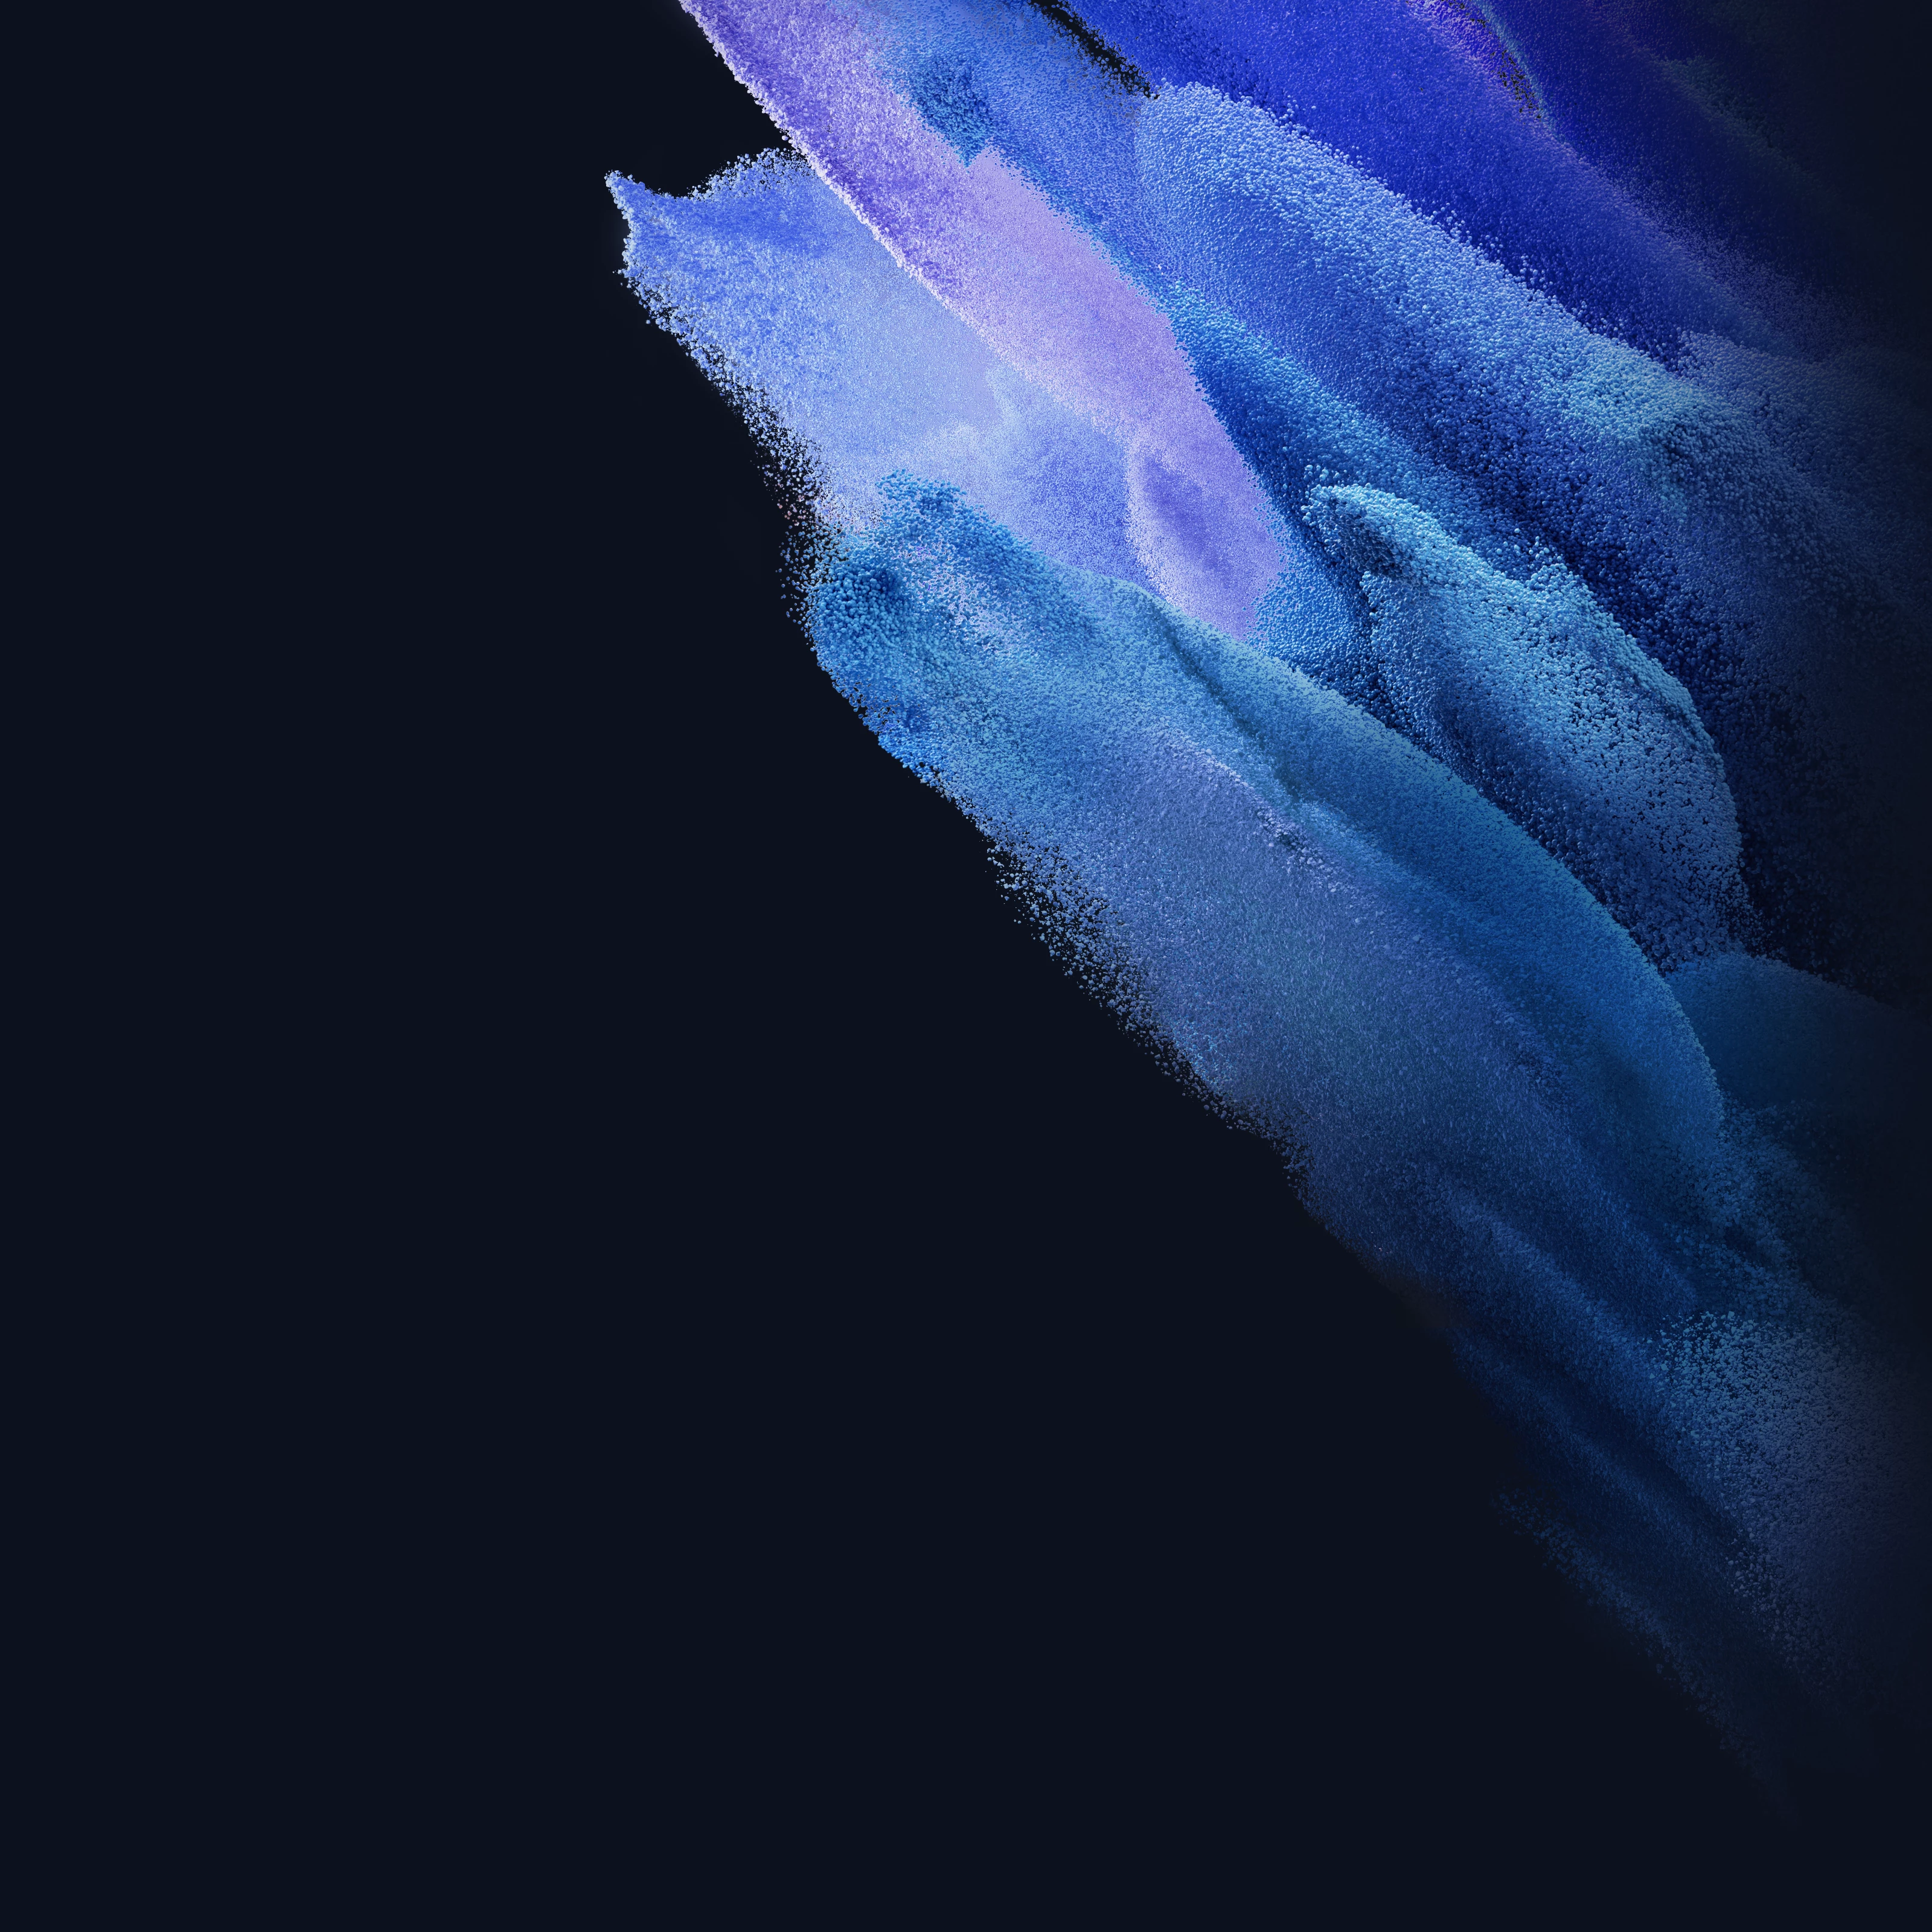 Samsung Galaxy S21 Wallpaper 4K, Stock, AMOLED, Particles, Blue, Black background, Abstract